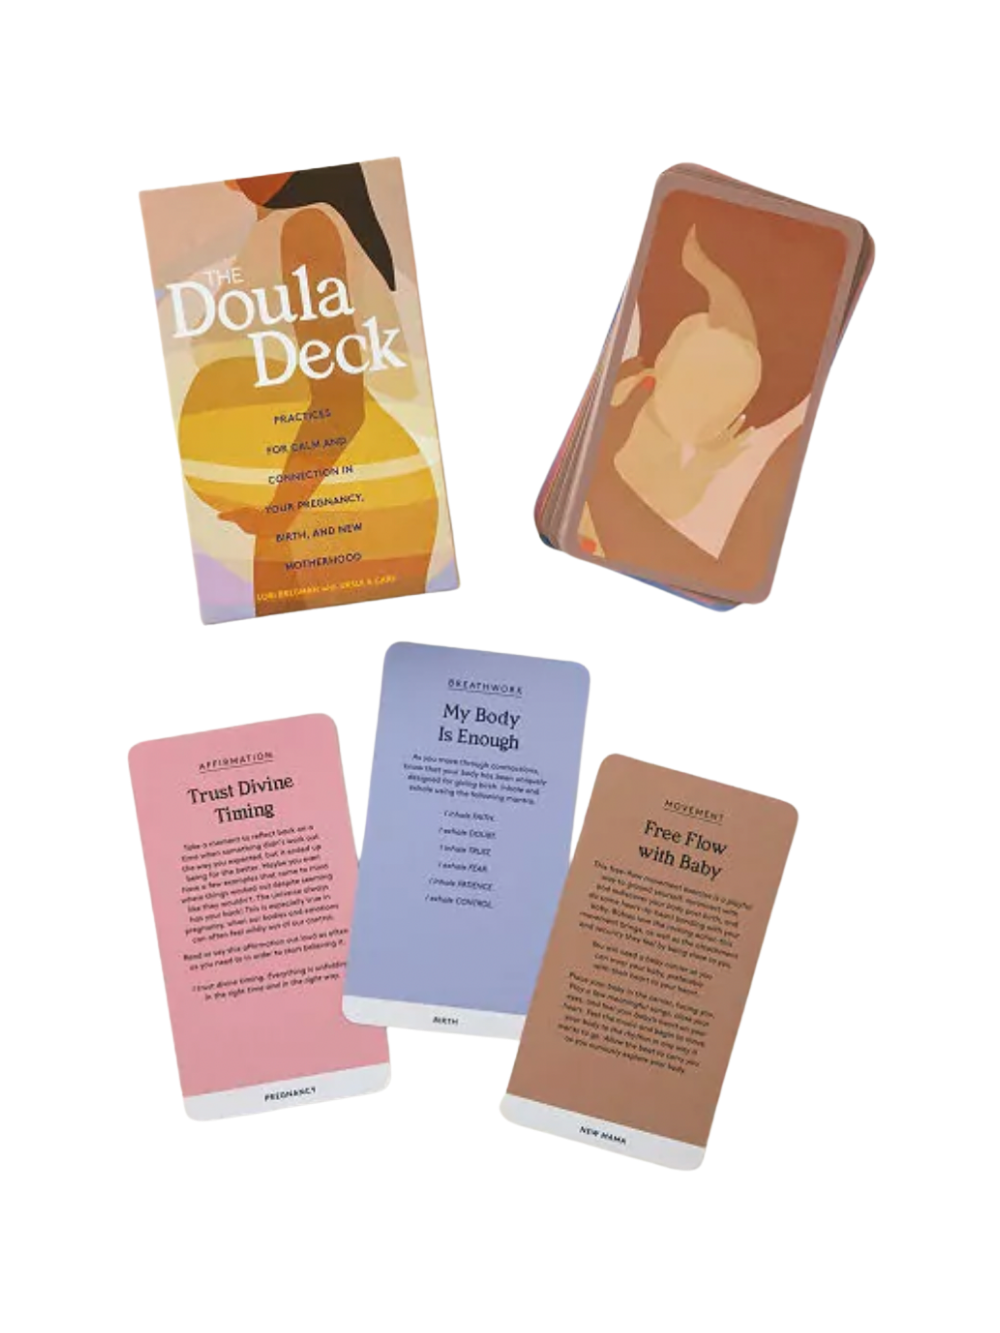 A card deck focused around meditation, breath work, and movement specifically for those expecting. 